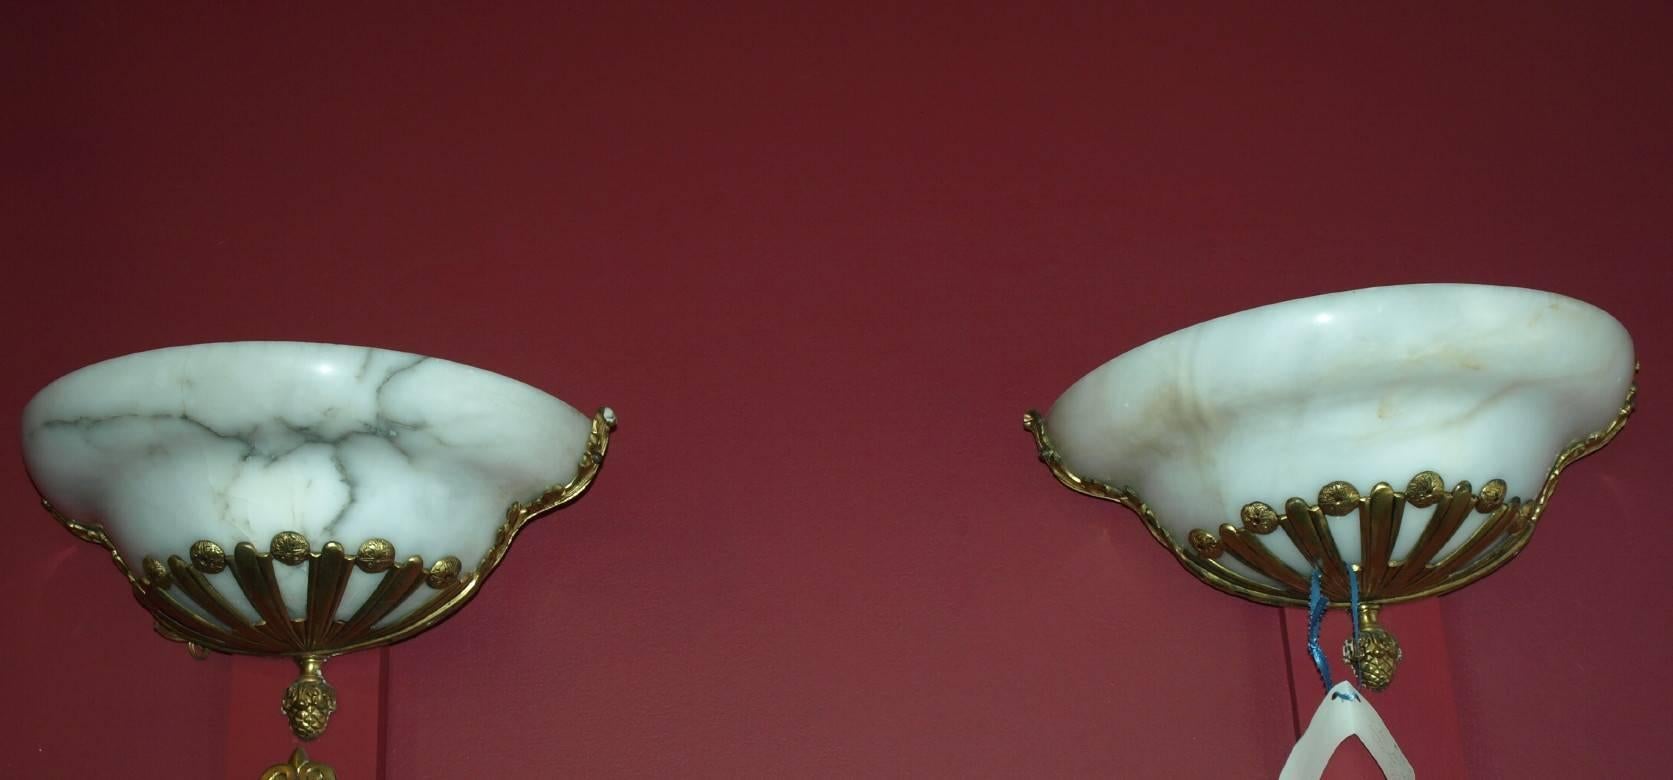 Nice pair of alabaster and gilt bronze sconces. Please notice one has more veining in the natural stone alabaster than the other. Both are mounted on gilt bronze frames.